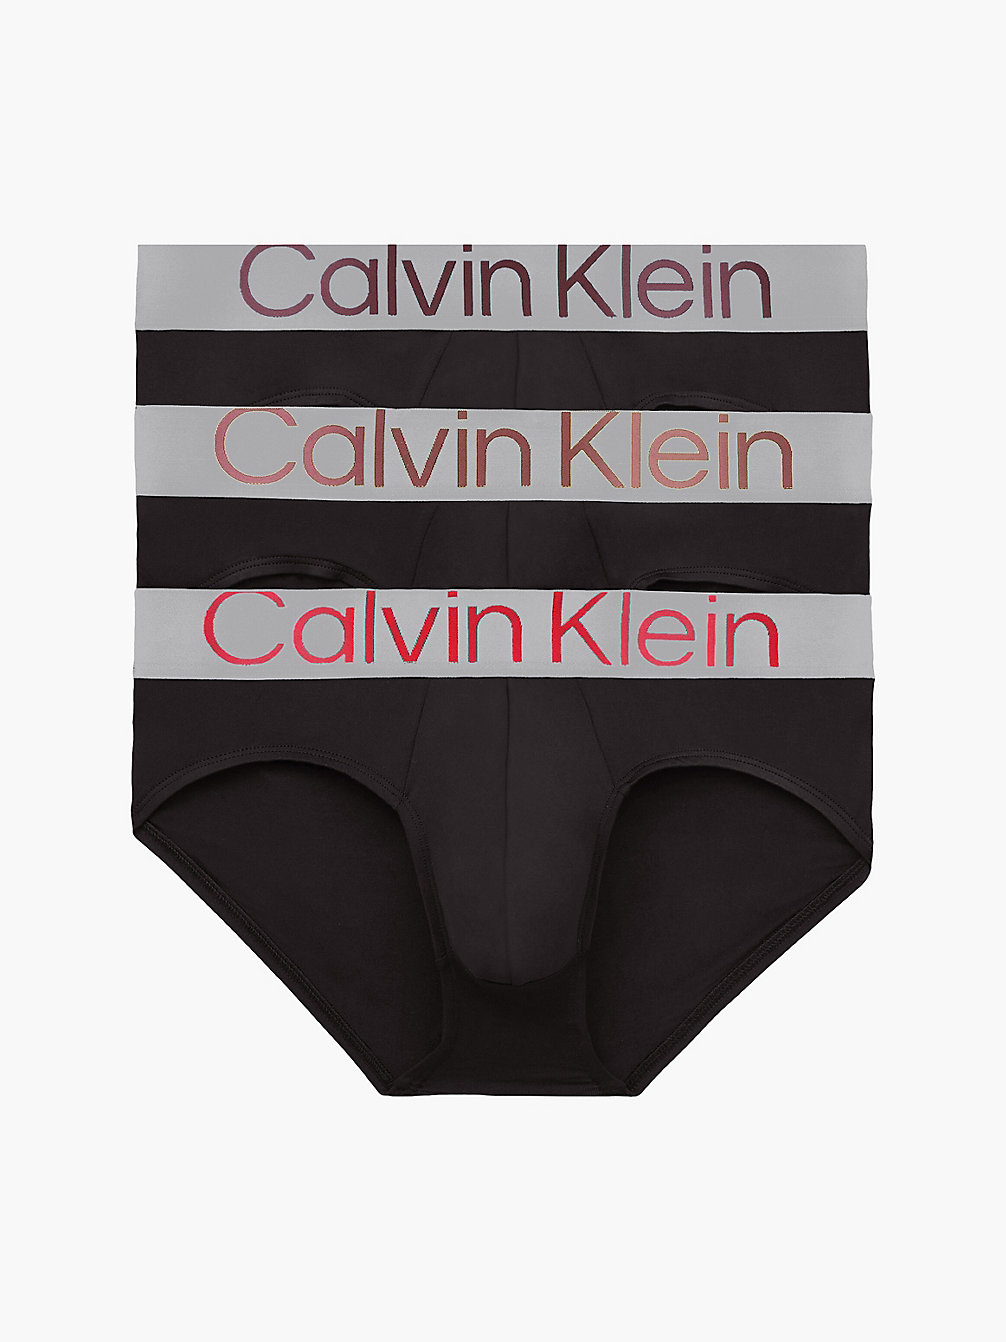 Pack De 3 Slips - Steel Micro > B-ORNG ODSY/ DUSTY CPPR/ RHONE LOGO > undefined mujer > Calvin Klein